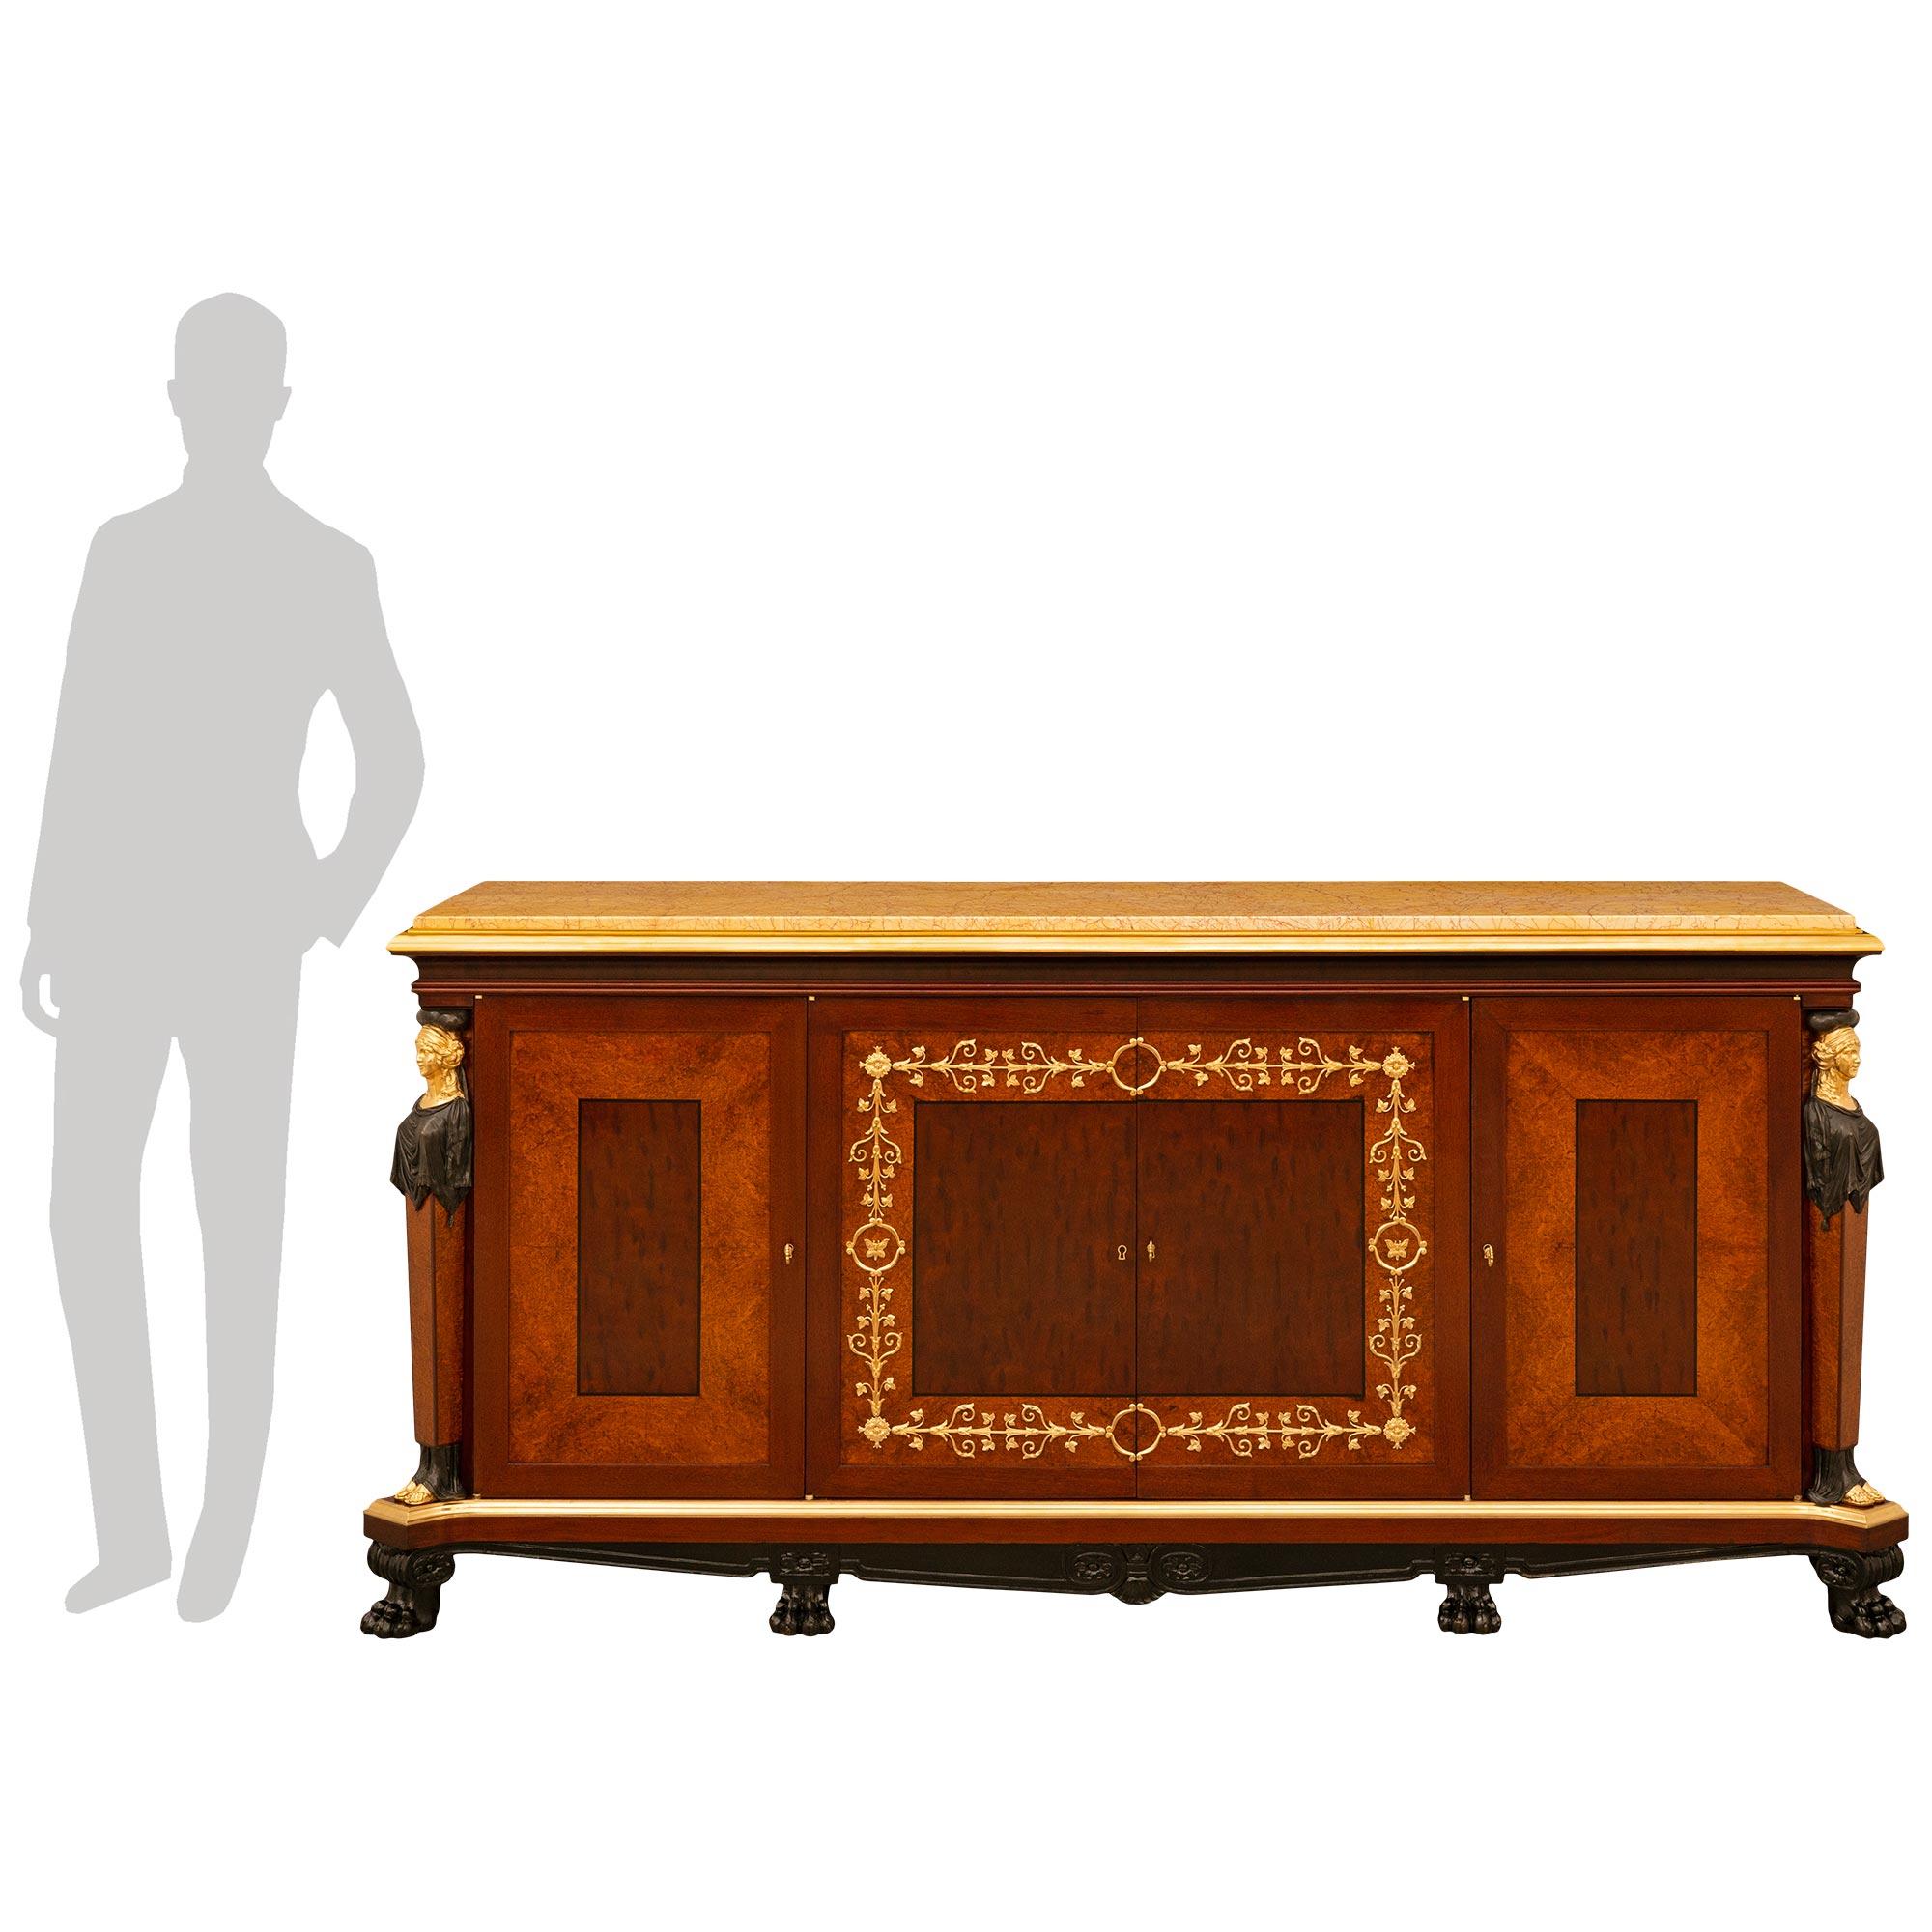 A wonderful and high quality French 19th century Empire st. Mouchette Mahogany, Burl Ash, Santos Mahogany, Kingwood, Ormolu, and Giallo Antico marble buffet. This stunning three drawer four door buffet is supported by eight Ebony paw feet connected